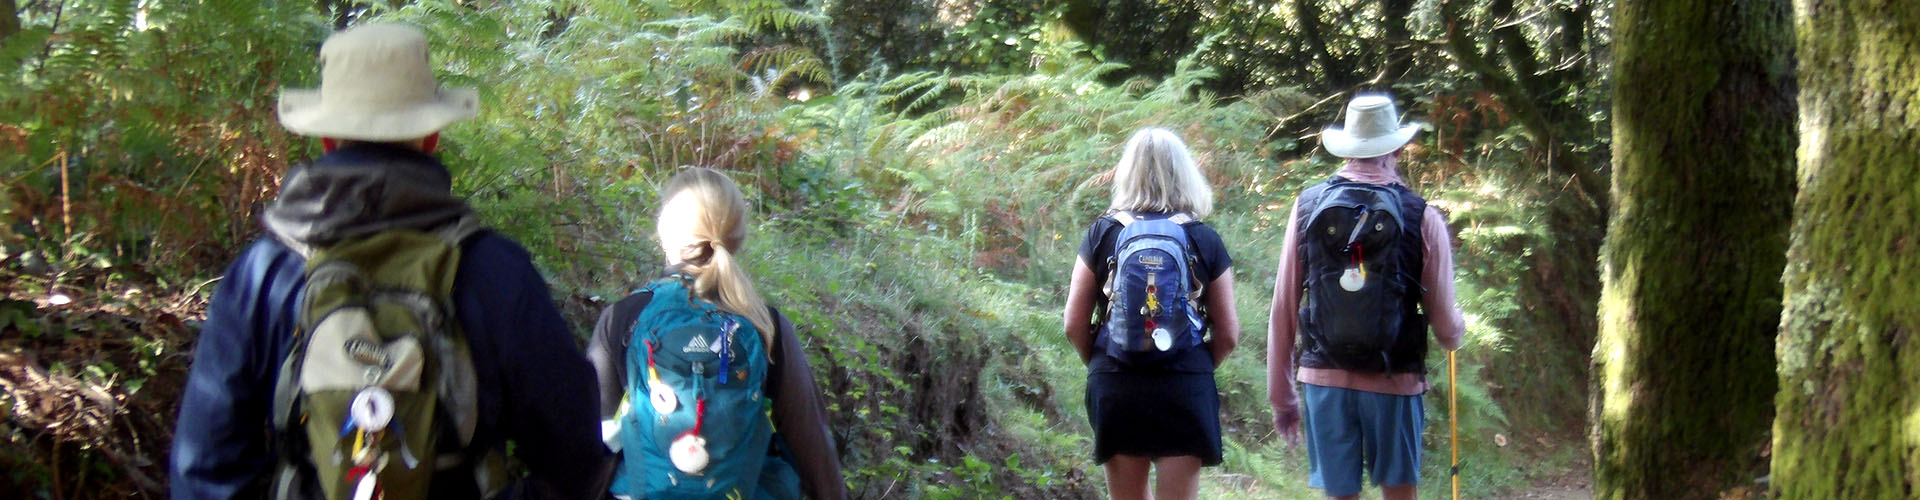 Camino pilgrim walking in a group inside a forest